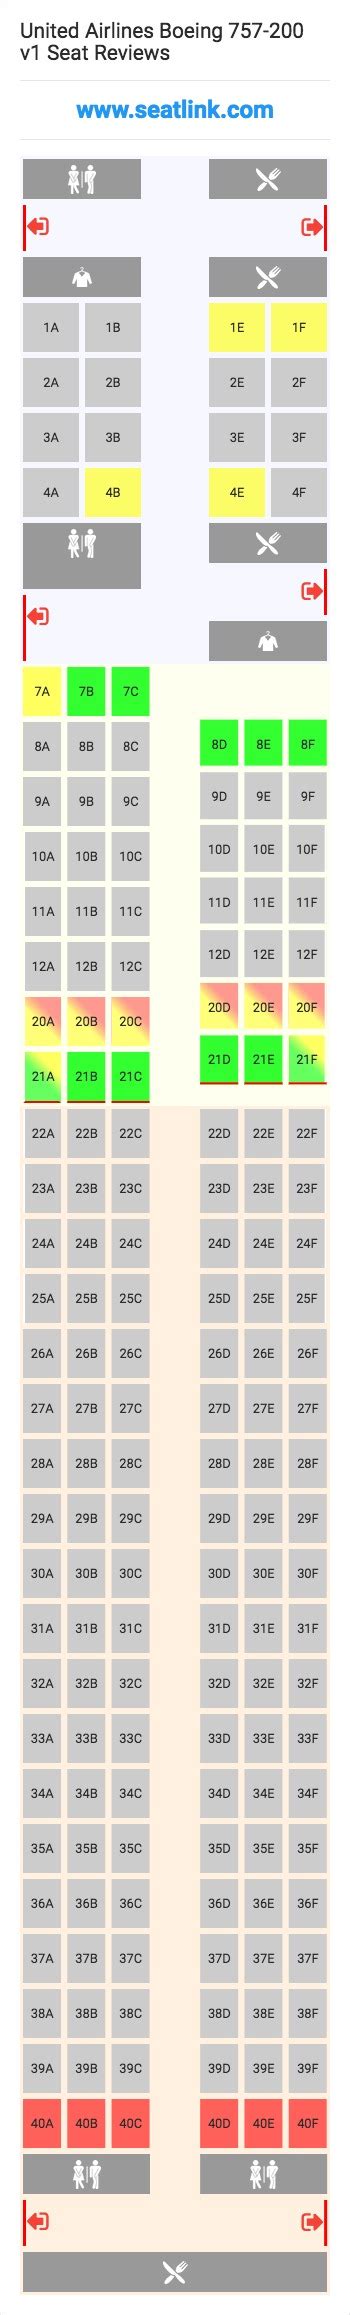 Seat Map And Seating Chart Boeing 757 200 Jet2 Boeing 757 Fleet Photos